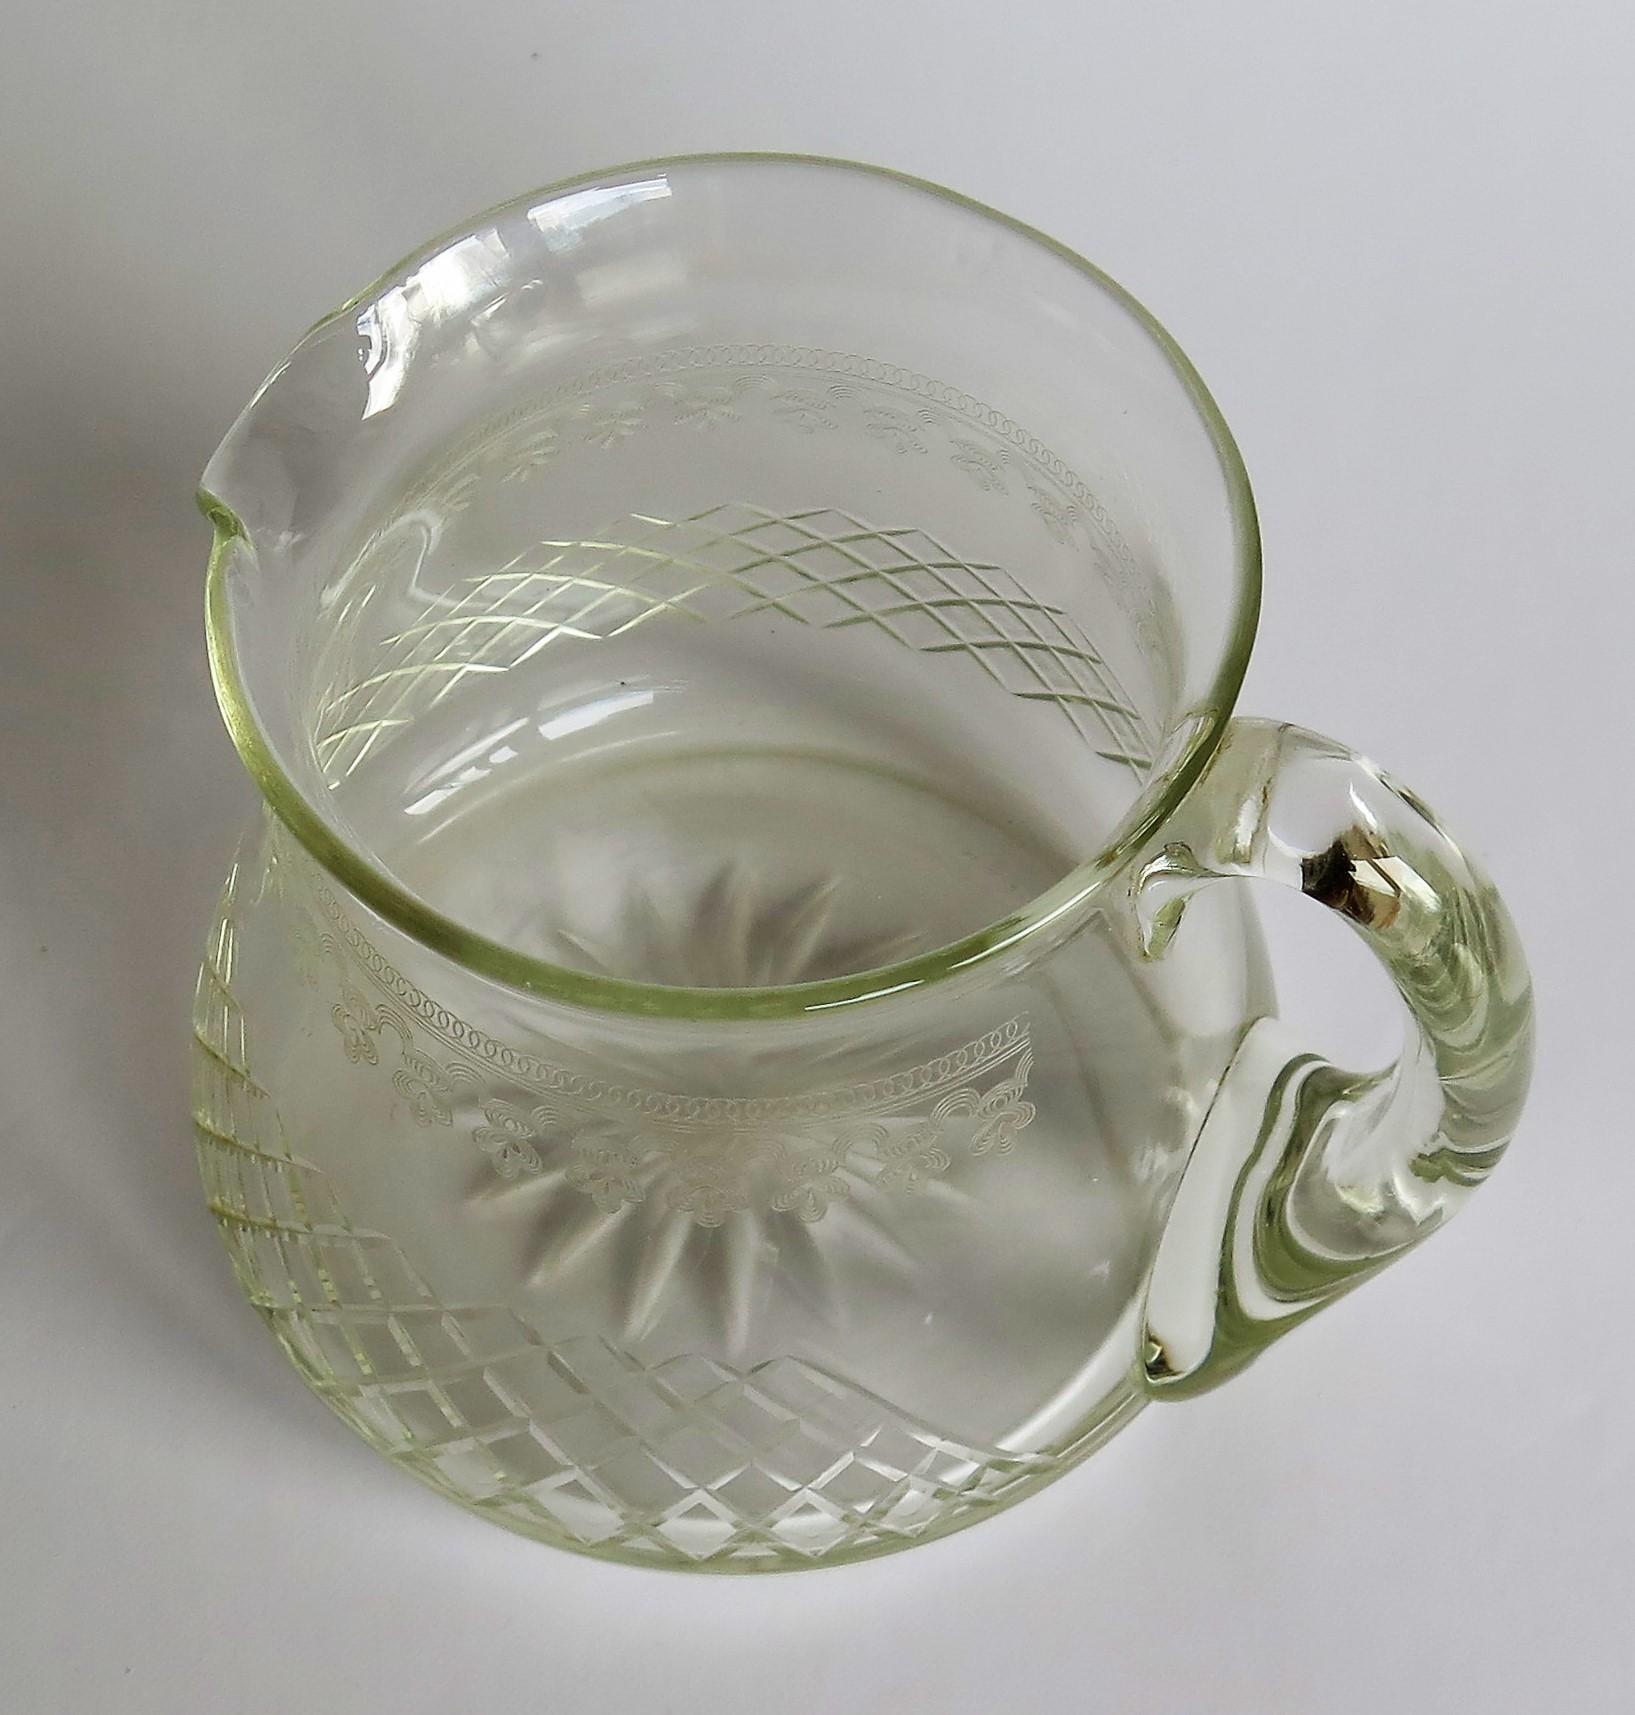 20th Century Edwardian Water Jug or Pitcher Crystal Lead Glass Cut and Engraved Holds 1.5 Pt